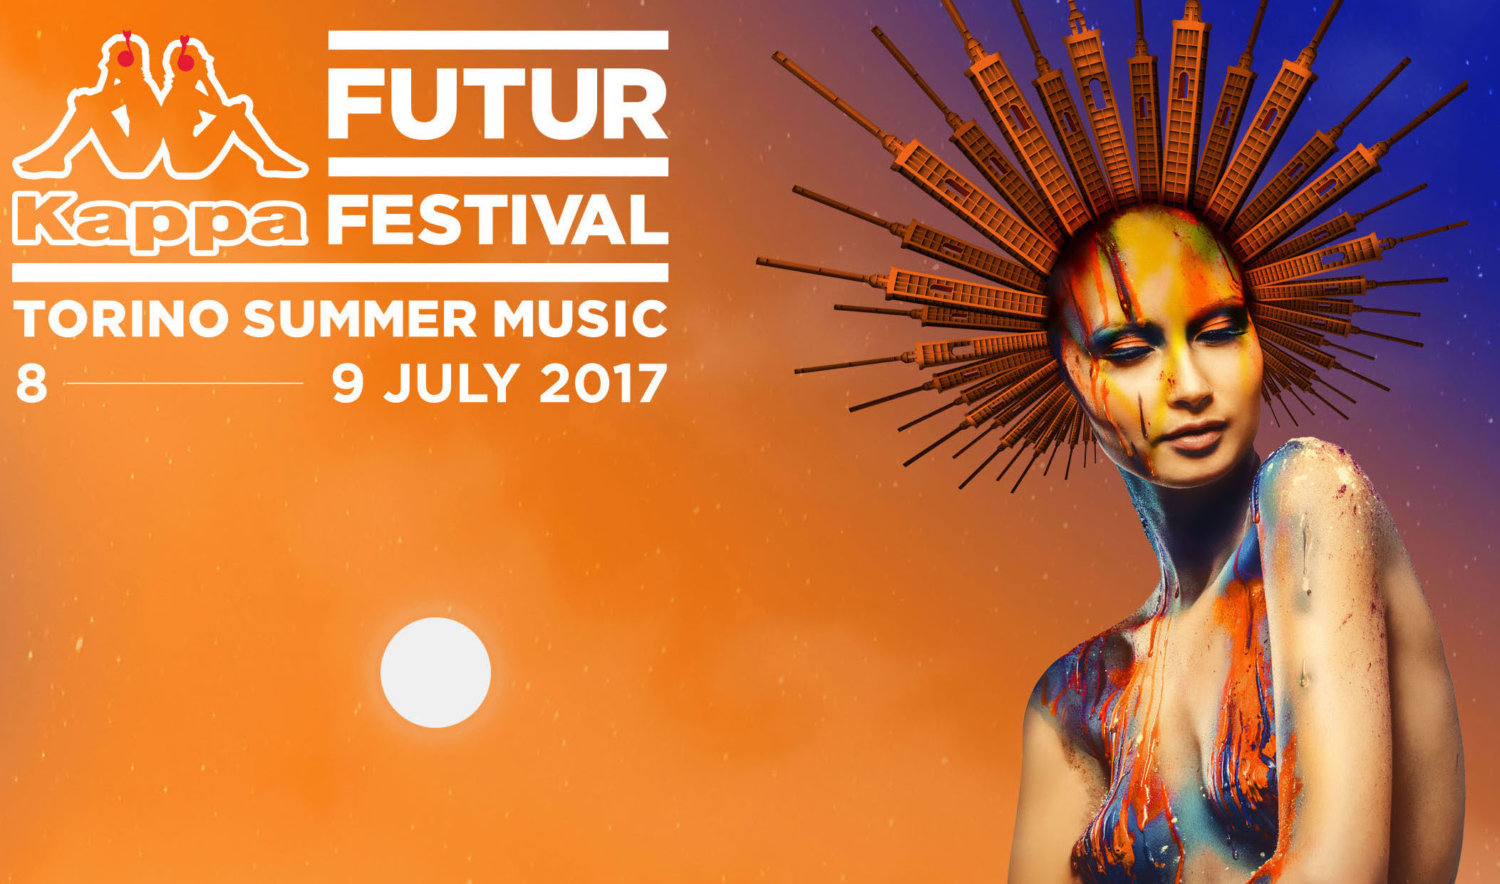 beha Martin Luther King Junior formeel Kappa Futur Festival to announce its final line-up! - HOUSE of Frankie